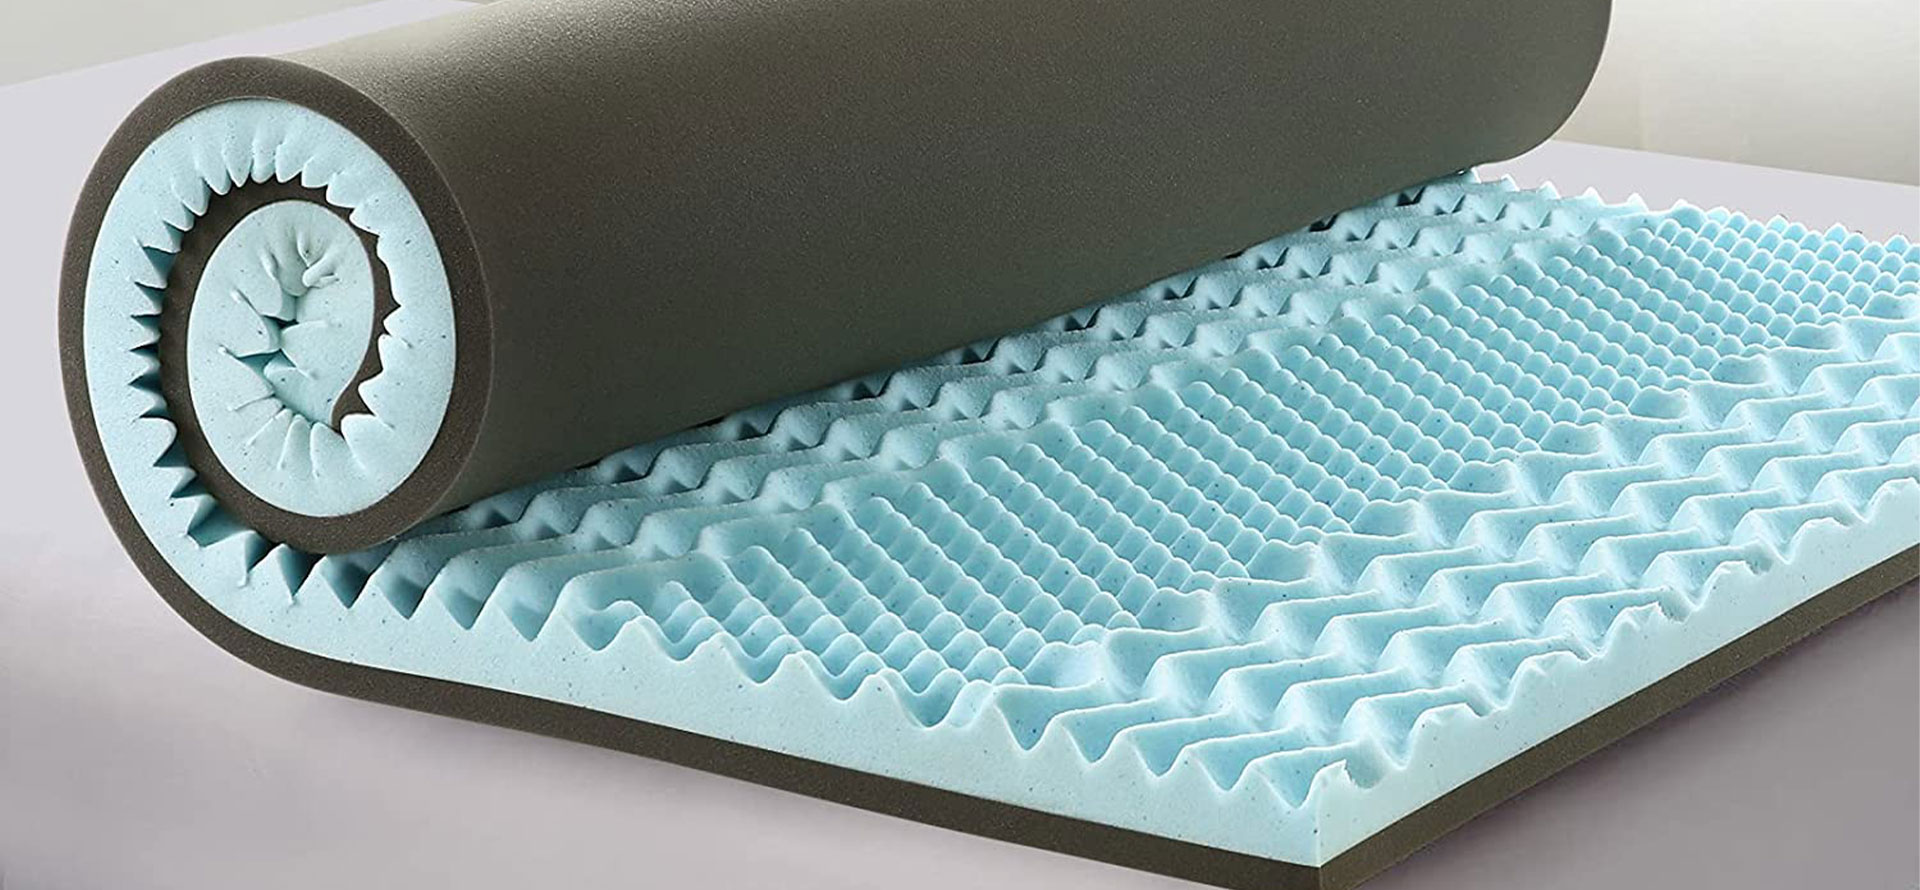 Cooling mattress topper on a bed. 